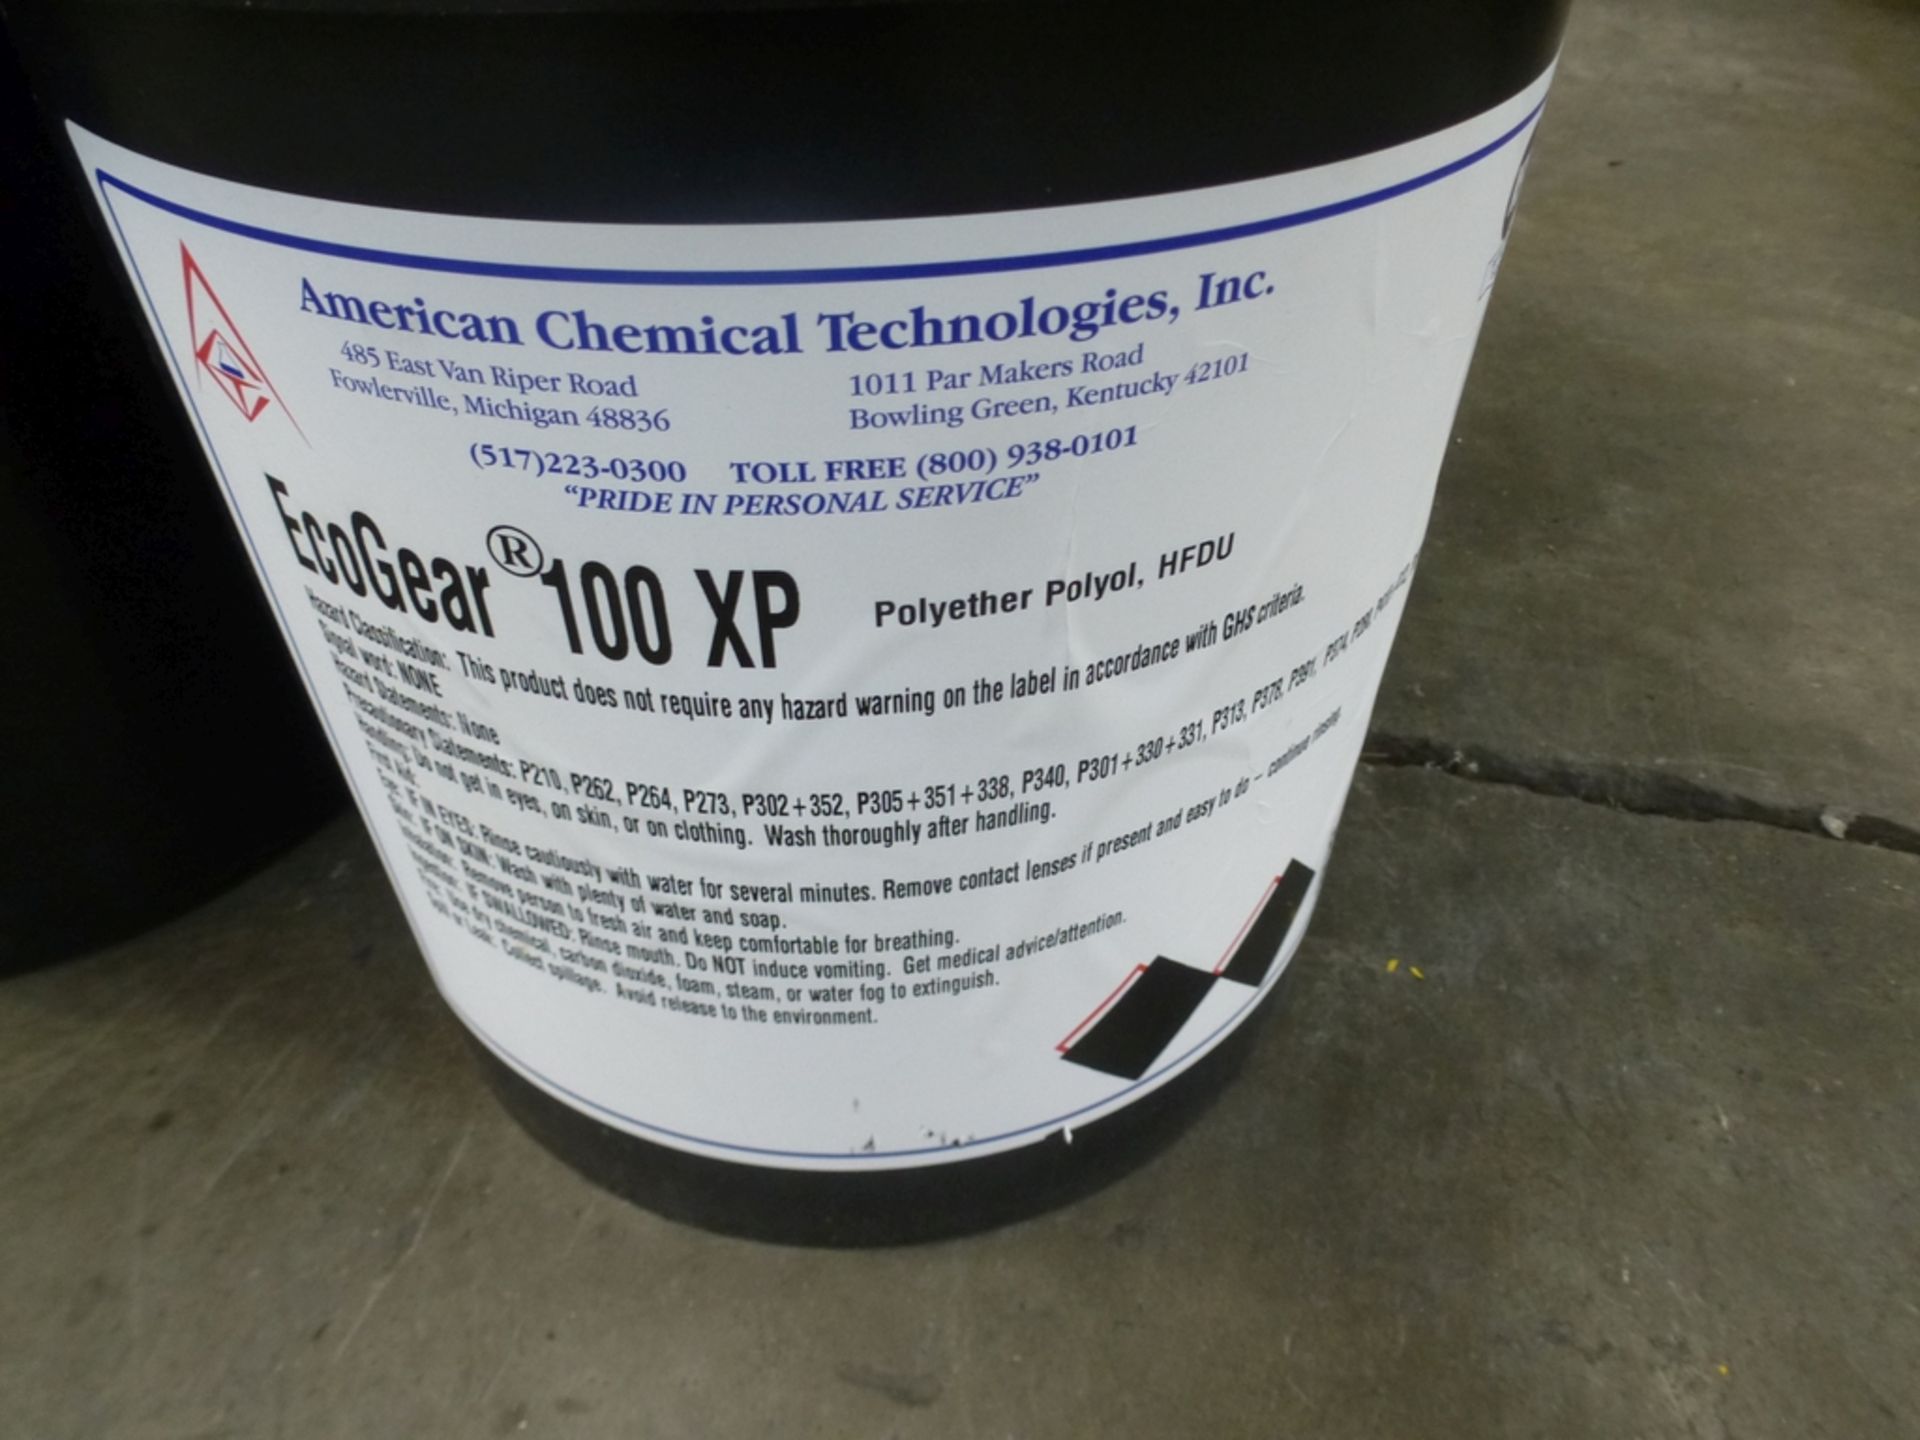 Lot of (4) 5 Gallon Buckets of Gear Oil - North Spartanburg, SC - EcoGear 100XP - Image 2 of 2